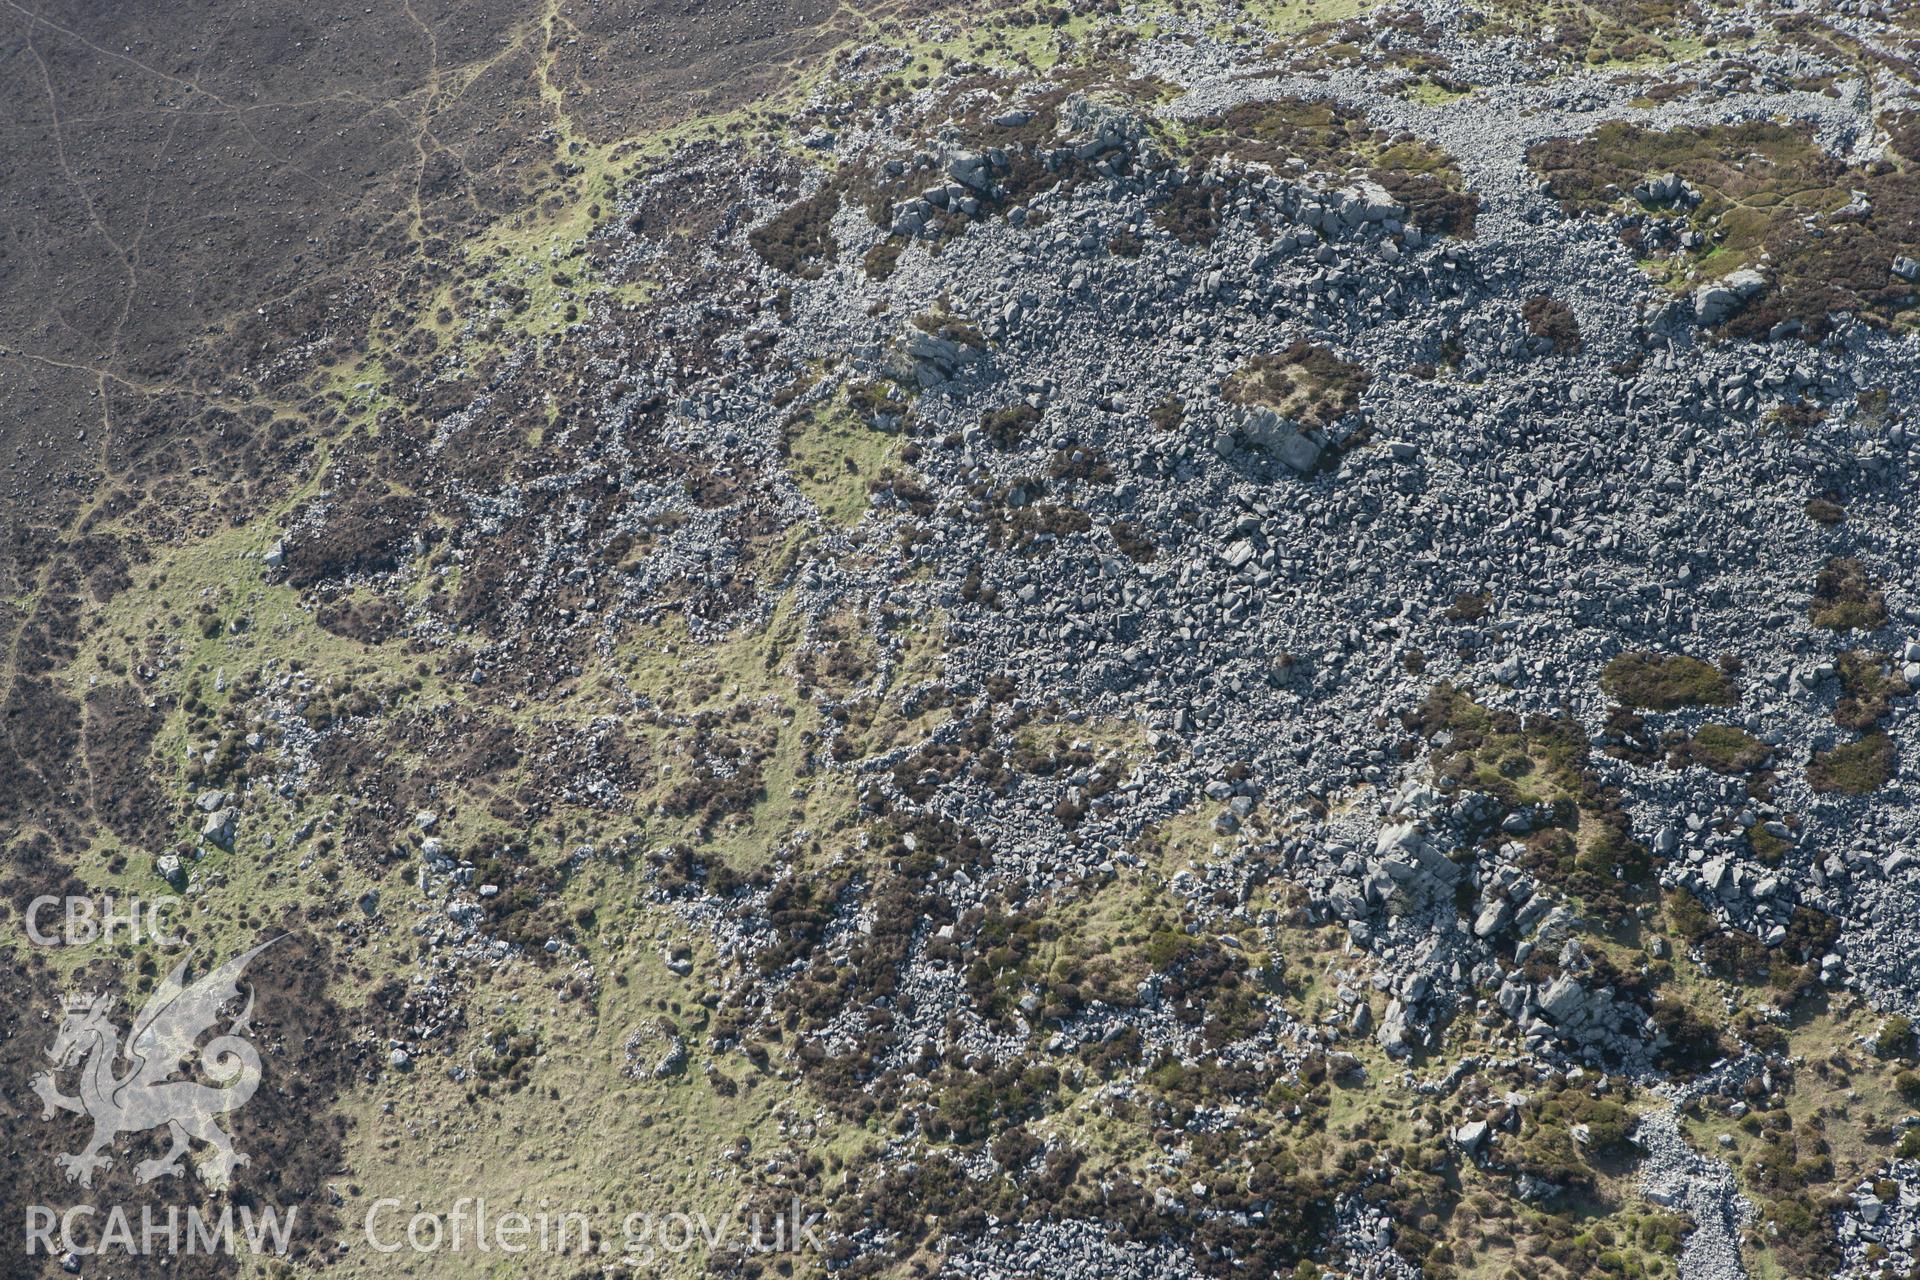 RCAHMW colour oblique aerial photograph of Carn Ingli Camp. Taken on 13 April 2010 by Toby Driver